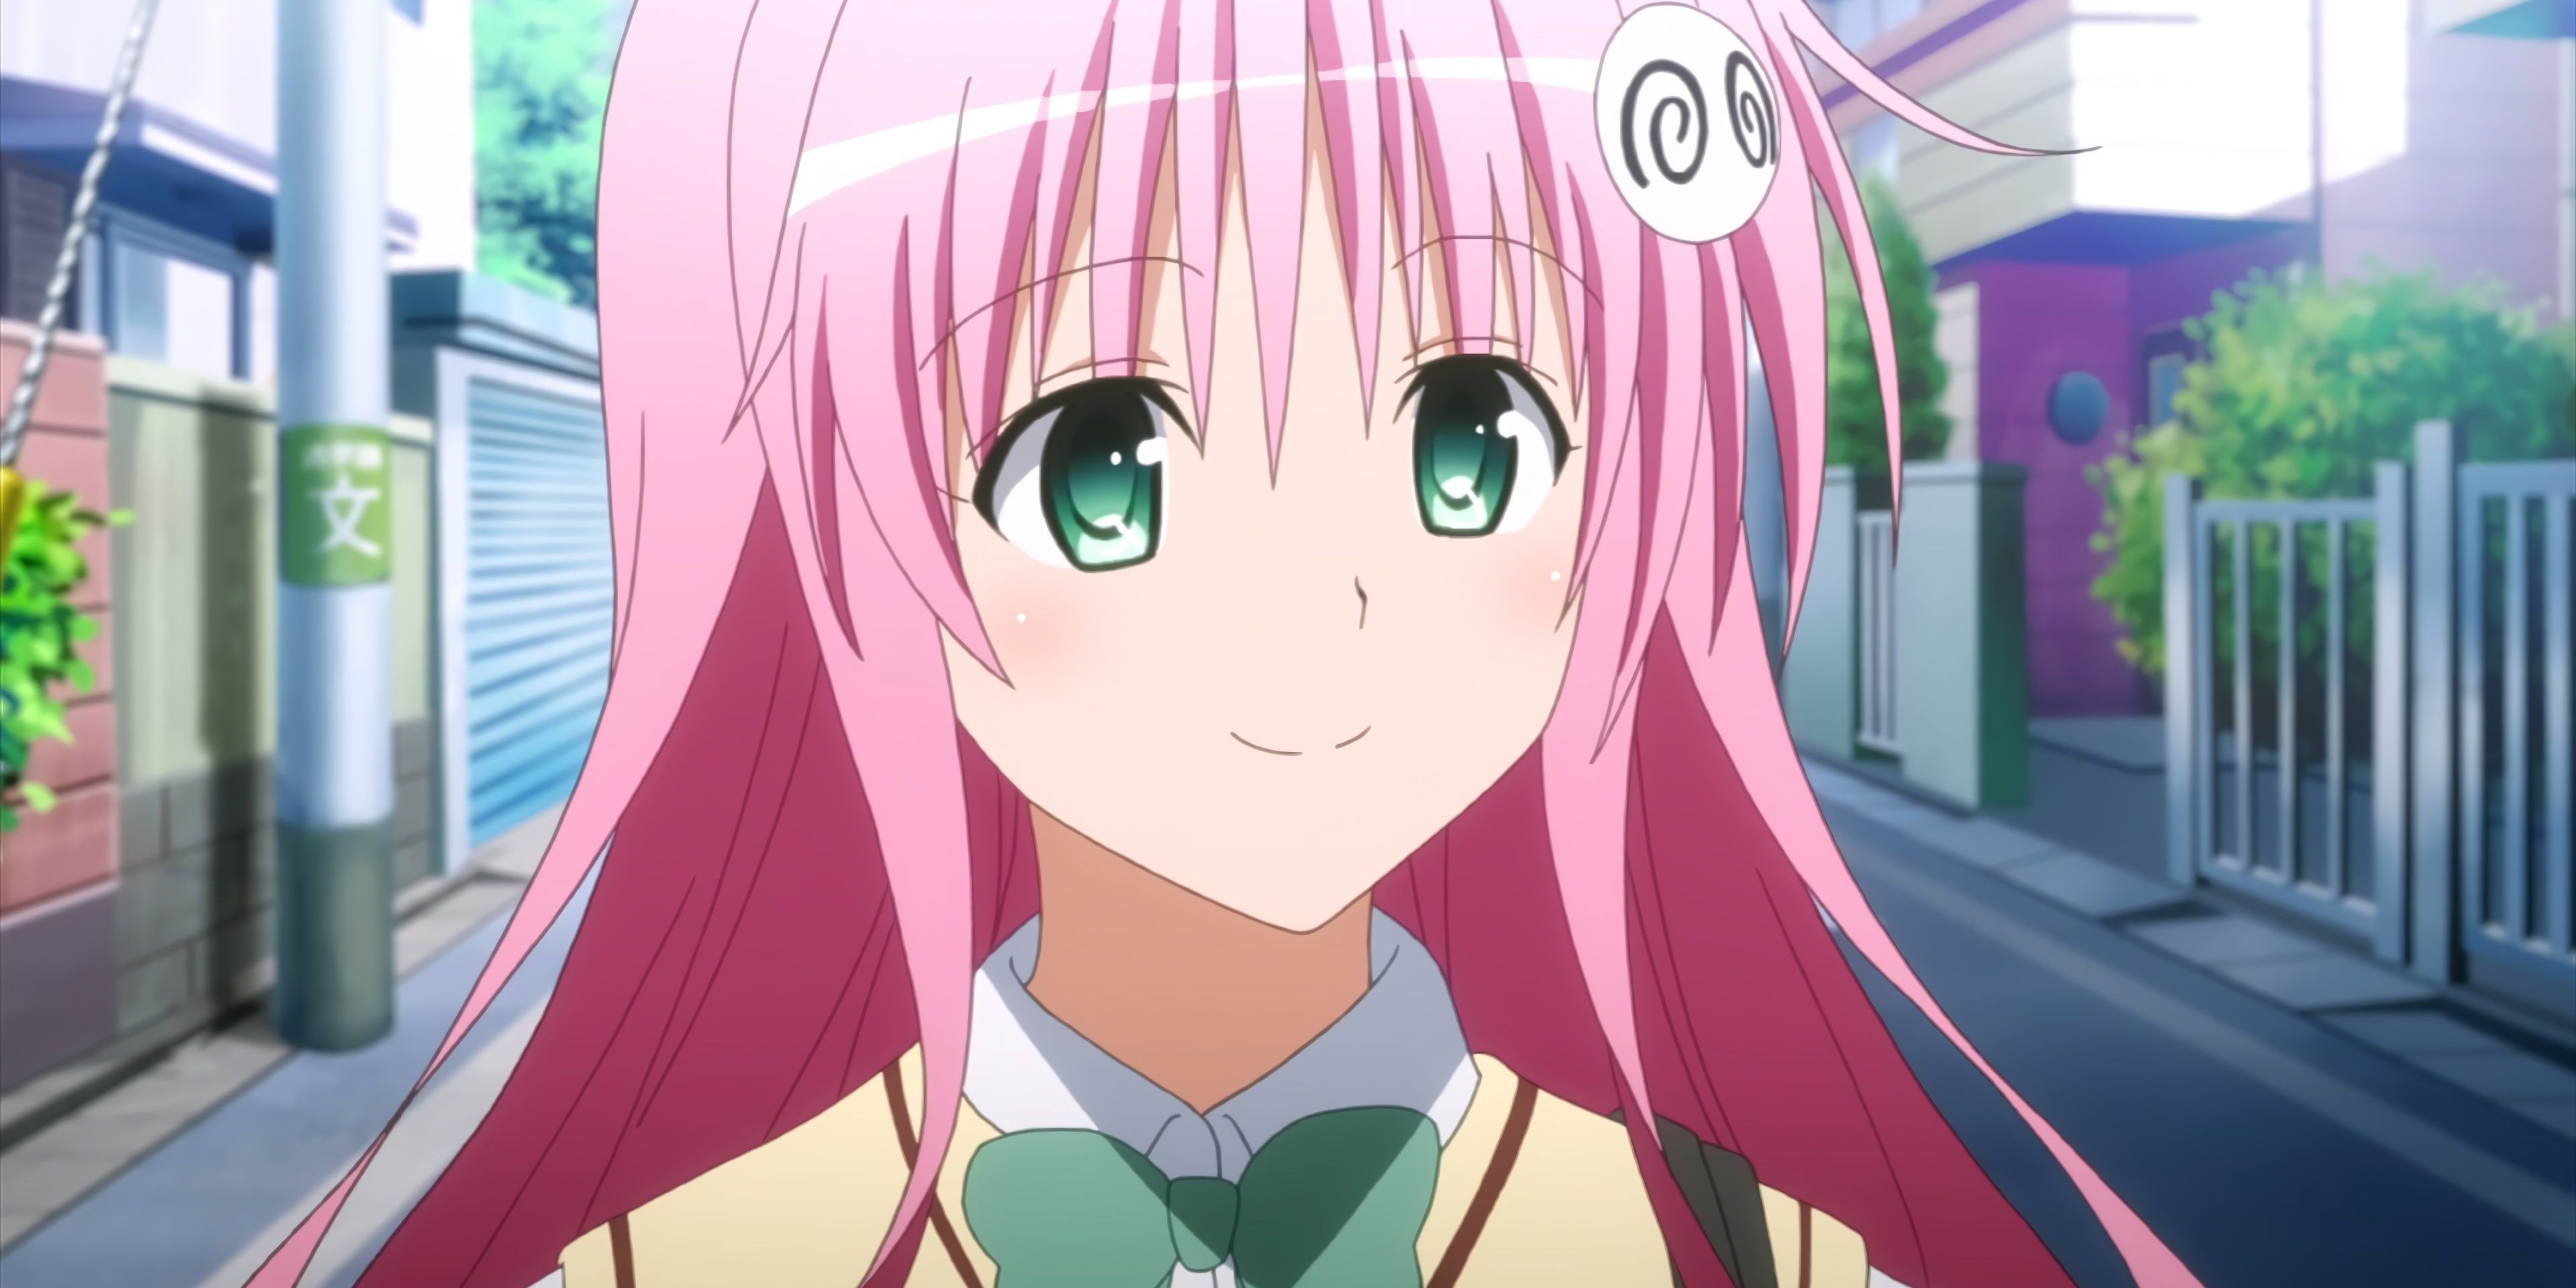 Lala in To Love Ru